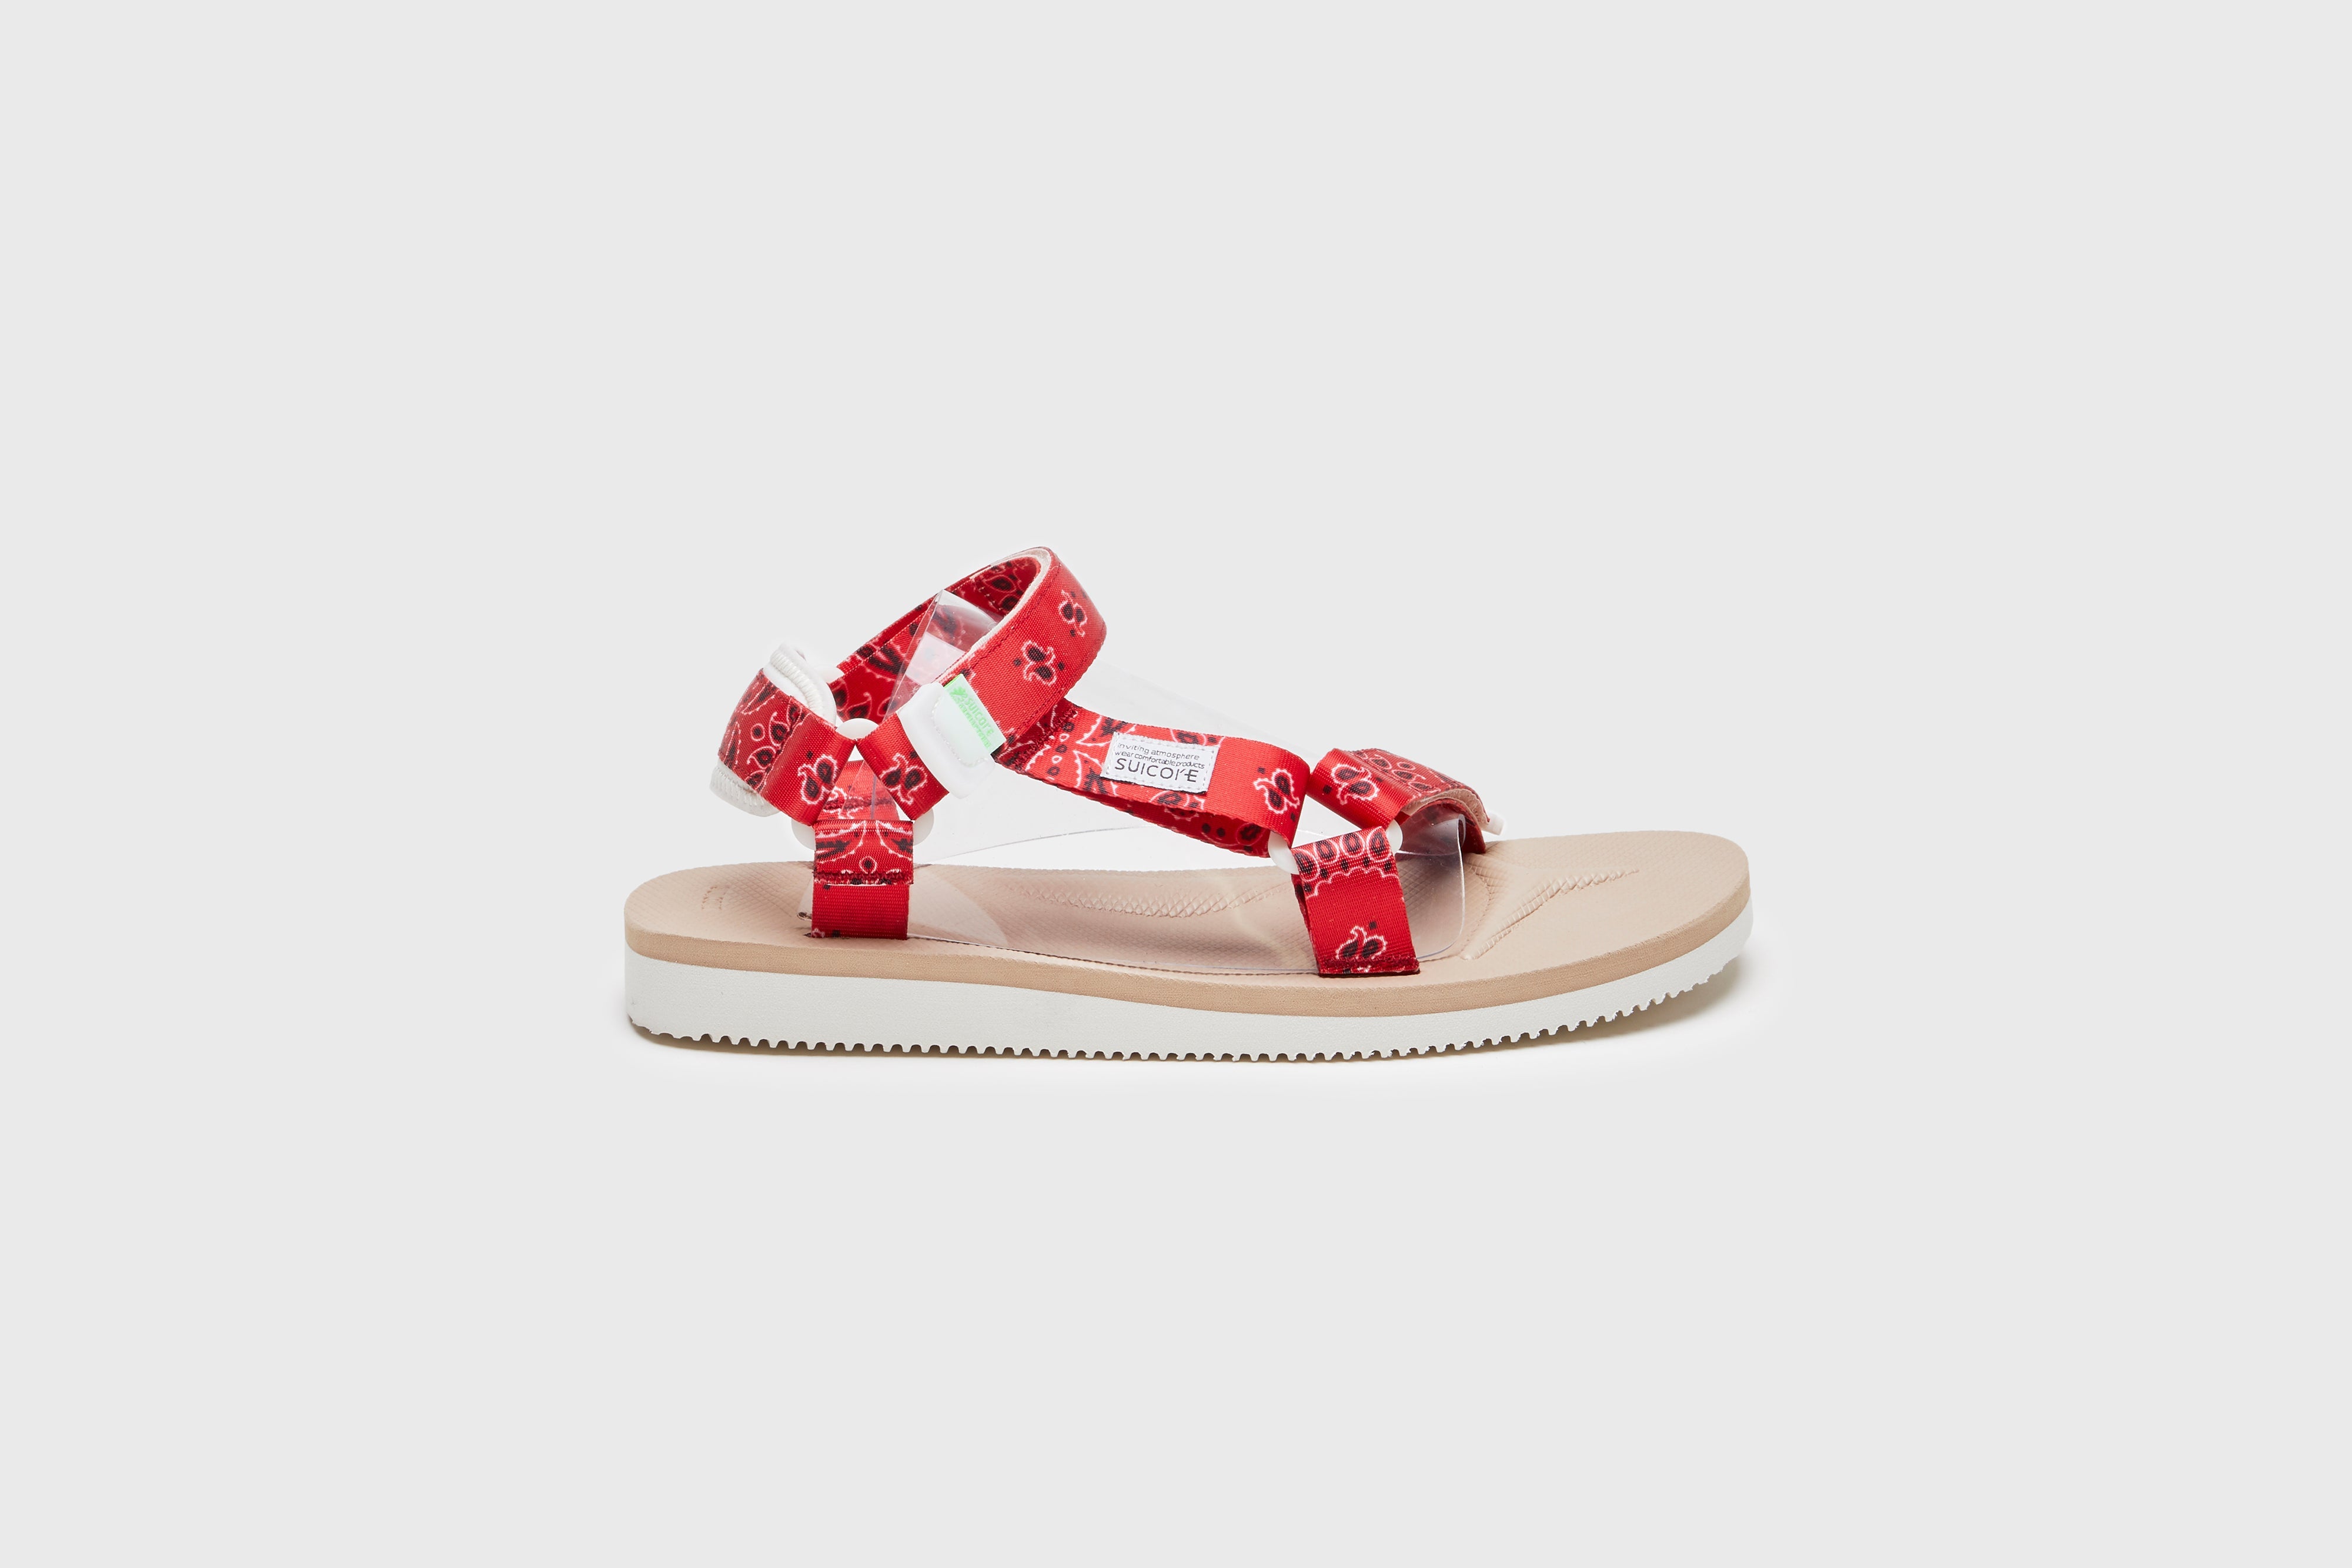 SUICOKE DEPA-Cab-PT05 sandals with red & beige nylon upper, red & beige midsole and sole, strap and logo patch. From Spring/Summer 2023 collection on eightywingold Web Store, an official partner of SUICOKE. OG-022CAB-PT05 RED X BEIGE